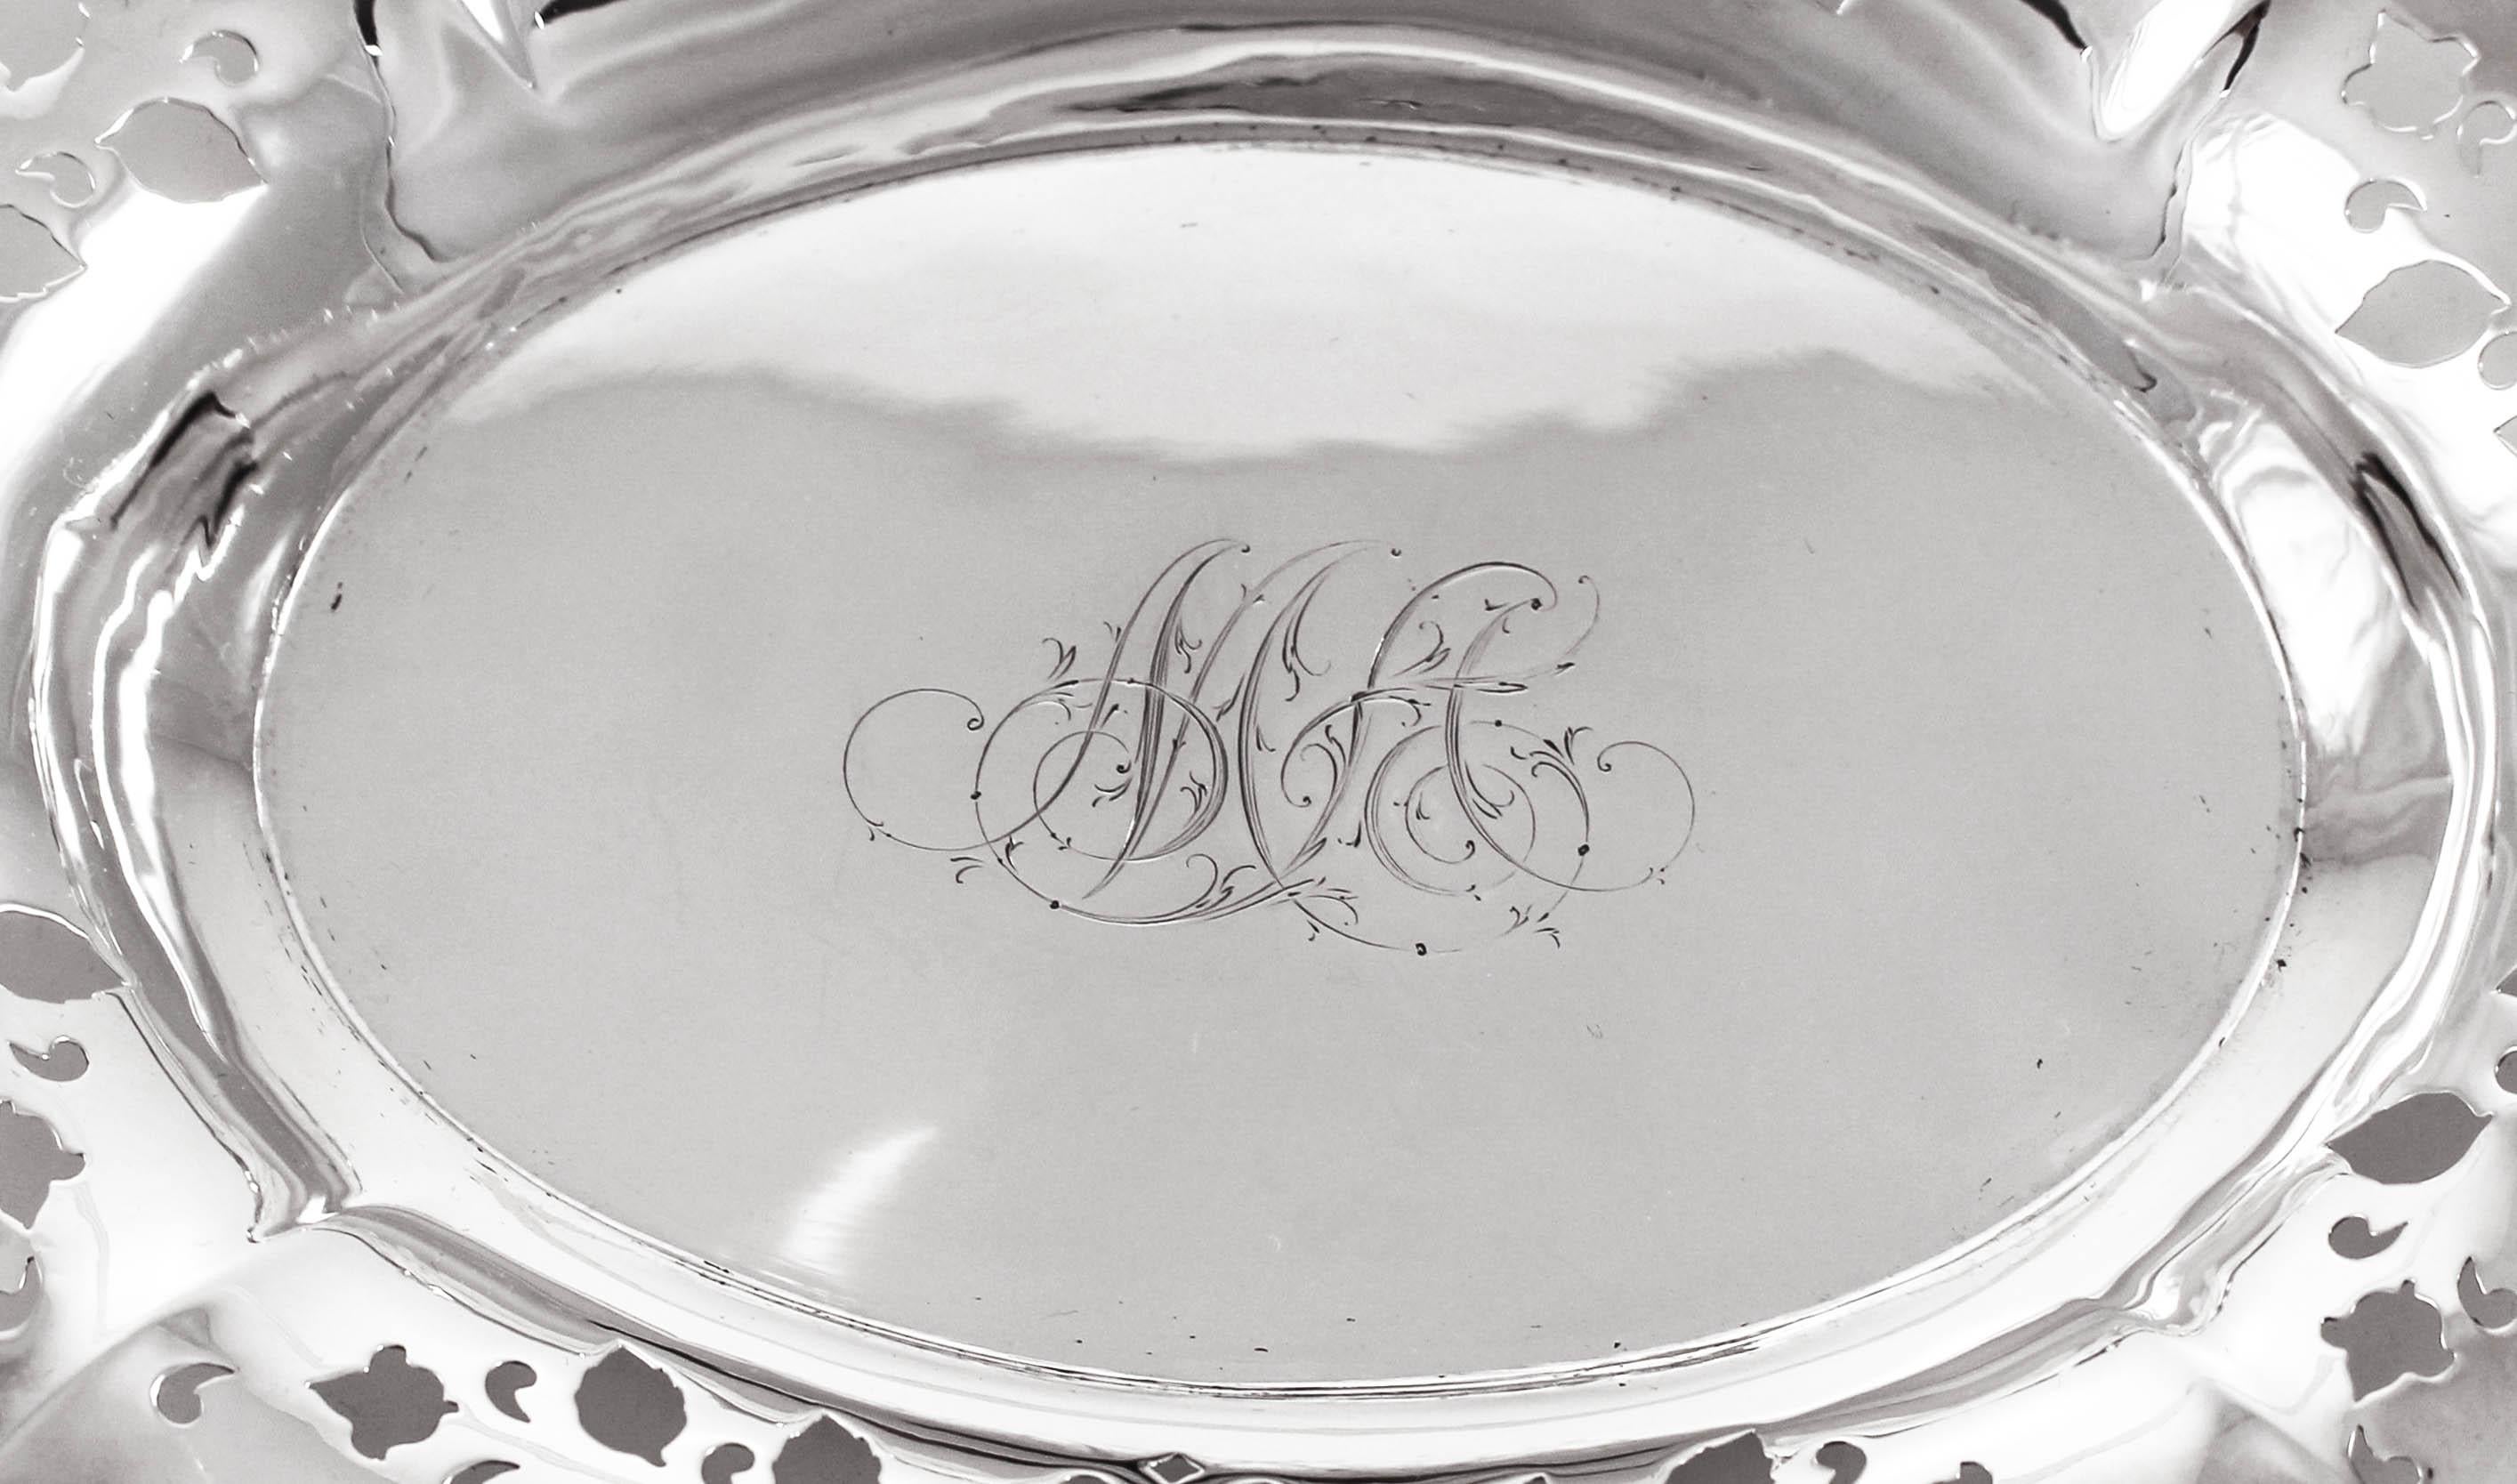 We are proud to offer this sterling silver dish by Wilcox and Eversten. It has a scalloped rim with cutouts around the border. Hearts, leaves and other shapes are cutout to give it an airy-look. In the center there is a hand engraved monogram. This